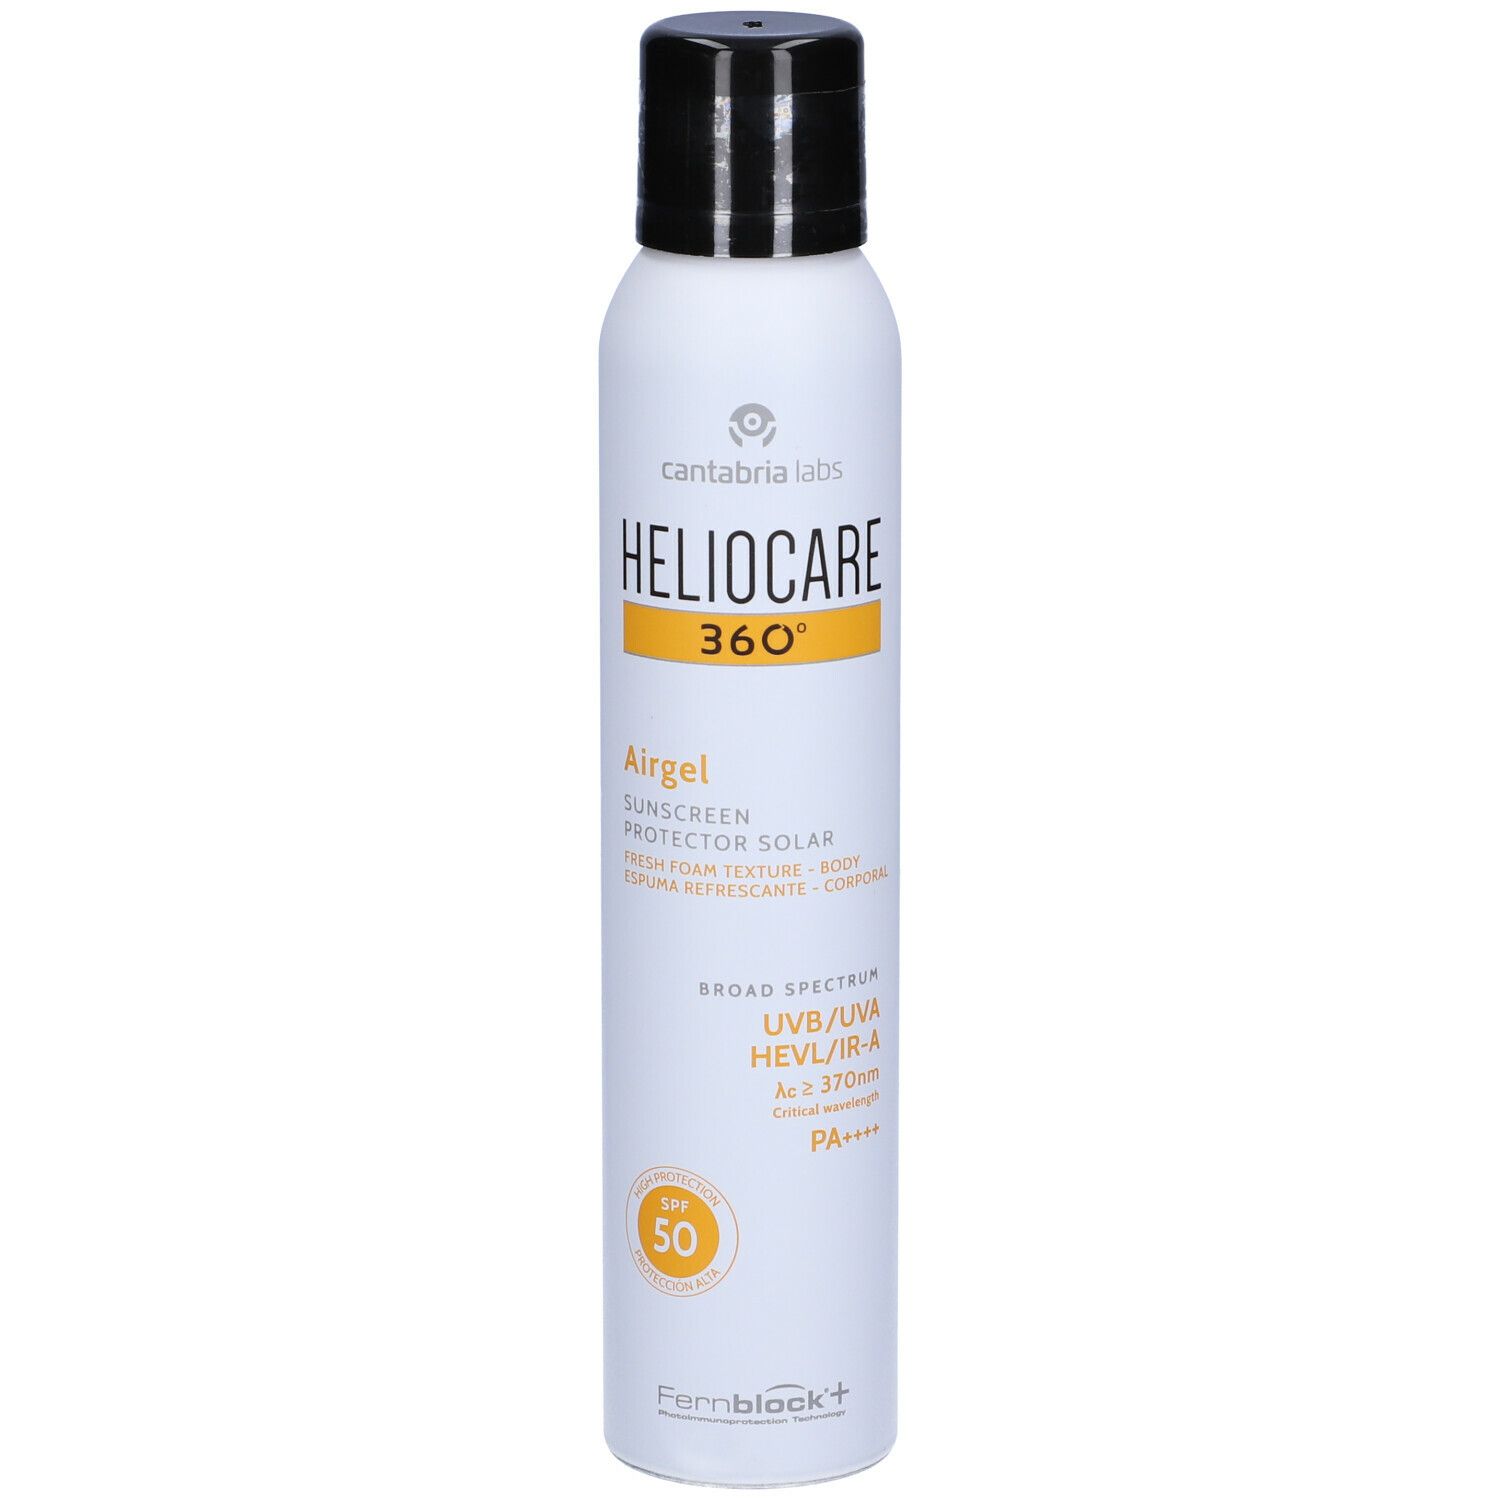 Heliocare 360° Airgel Spf 50